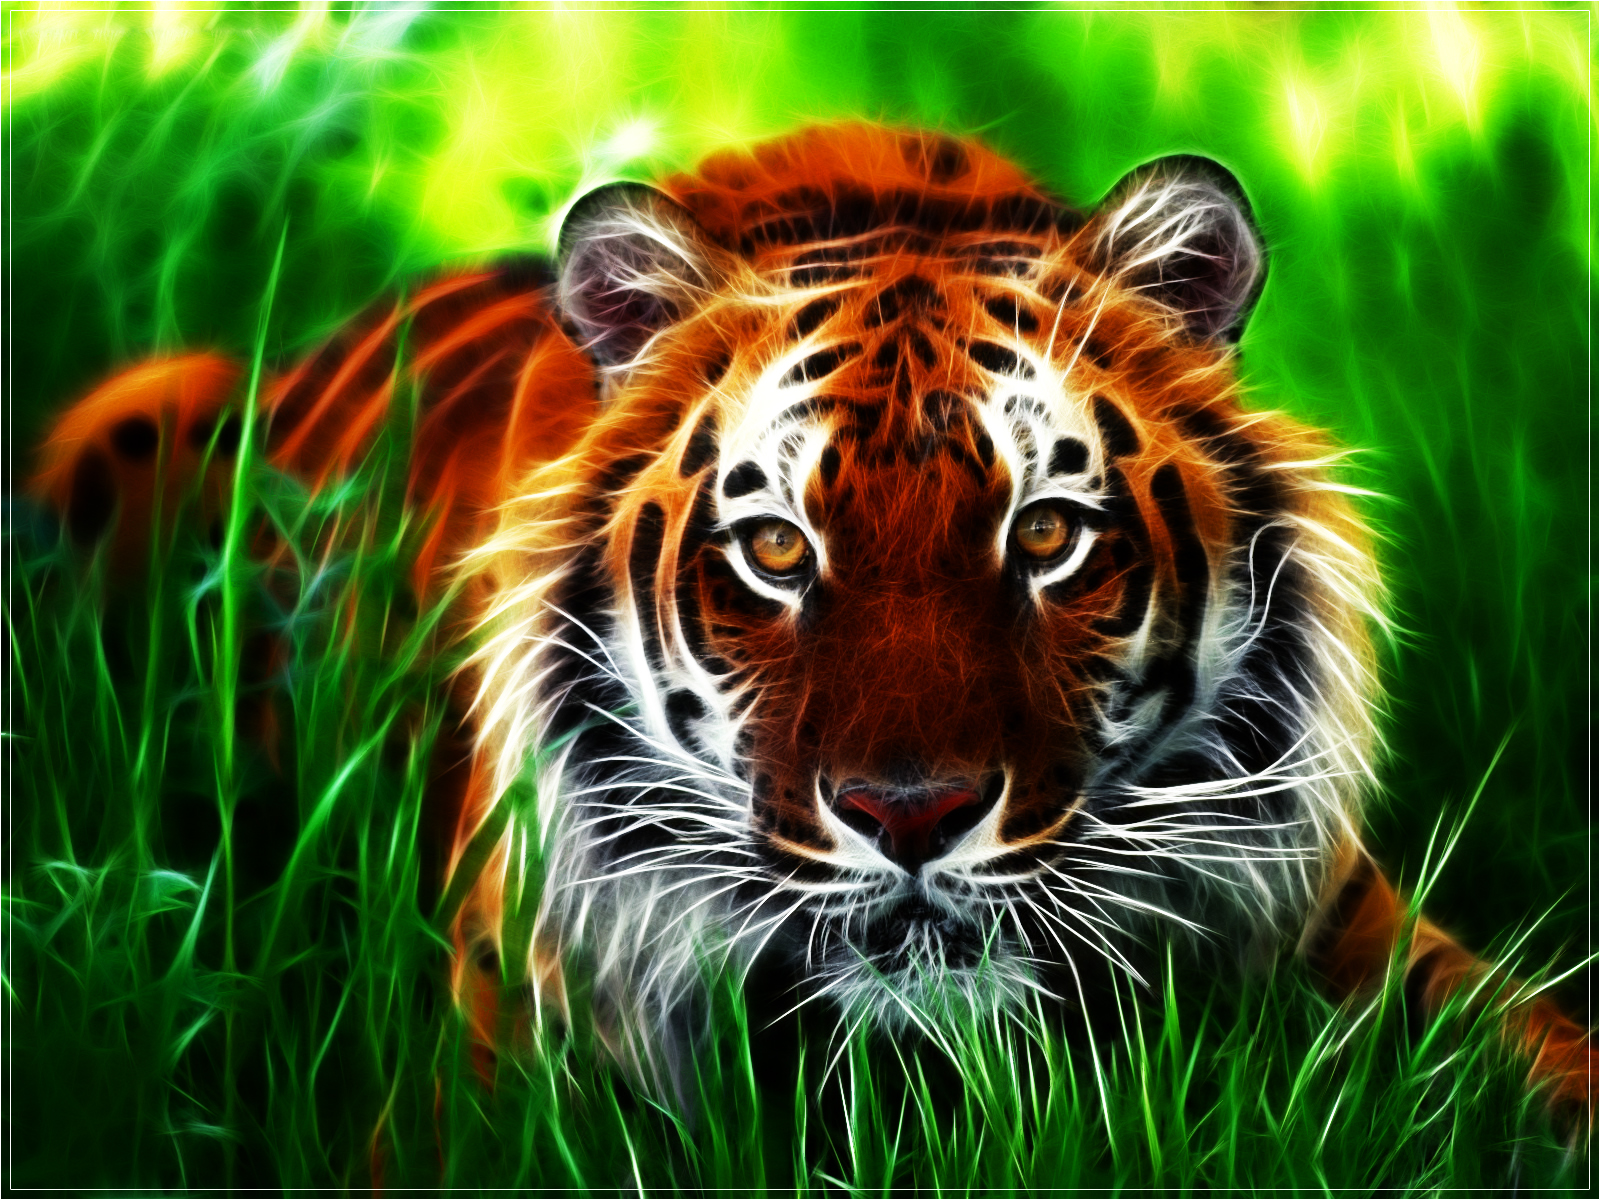 The Most Beautiful Tiger Wallpaper Full HD Points